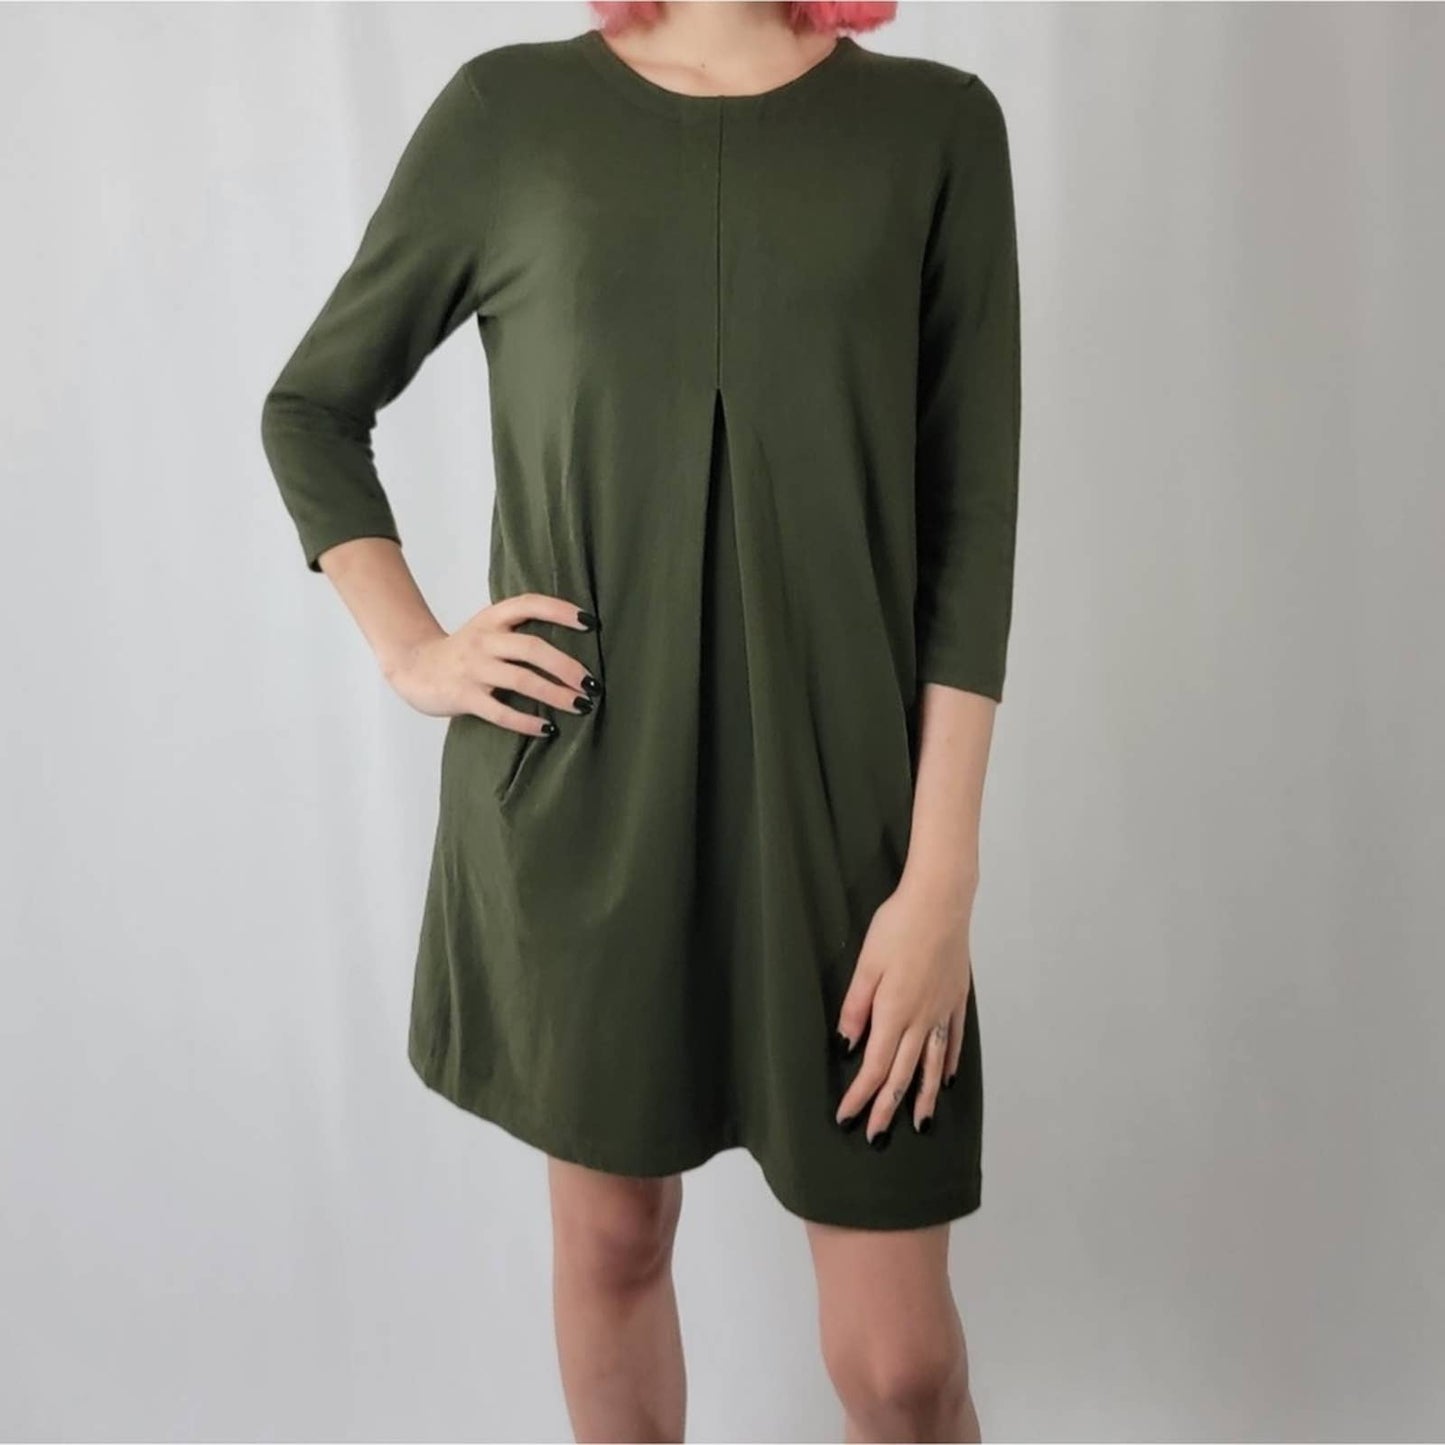 Tyler Boe Cashmere Olive Green Sweater Dress - S